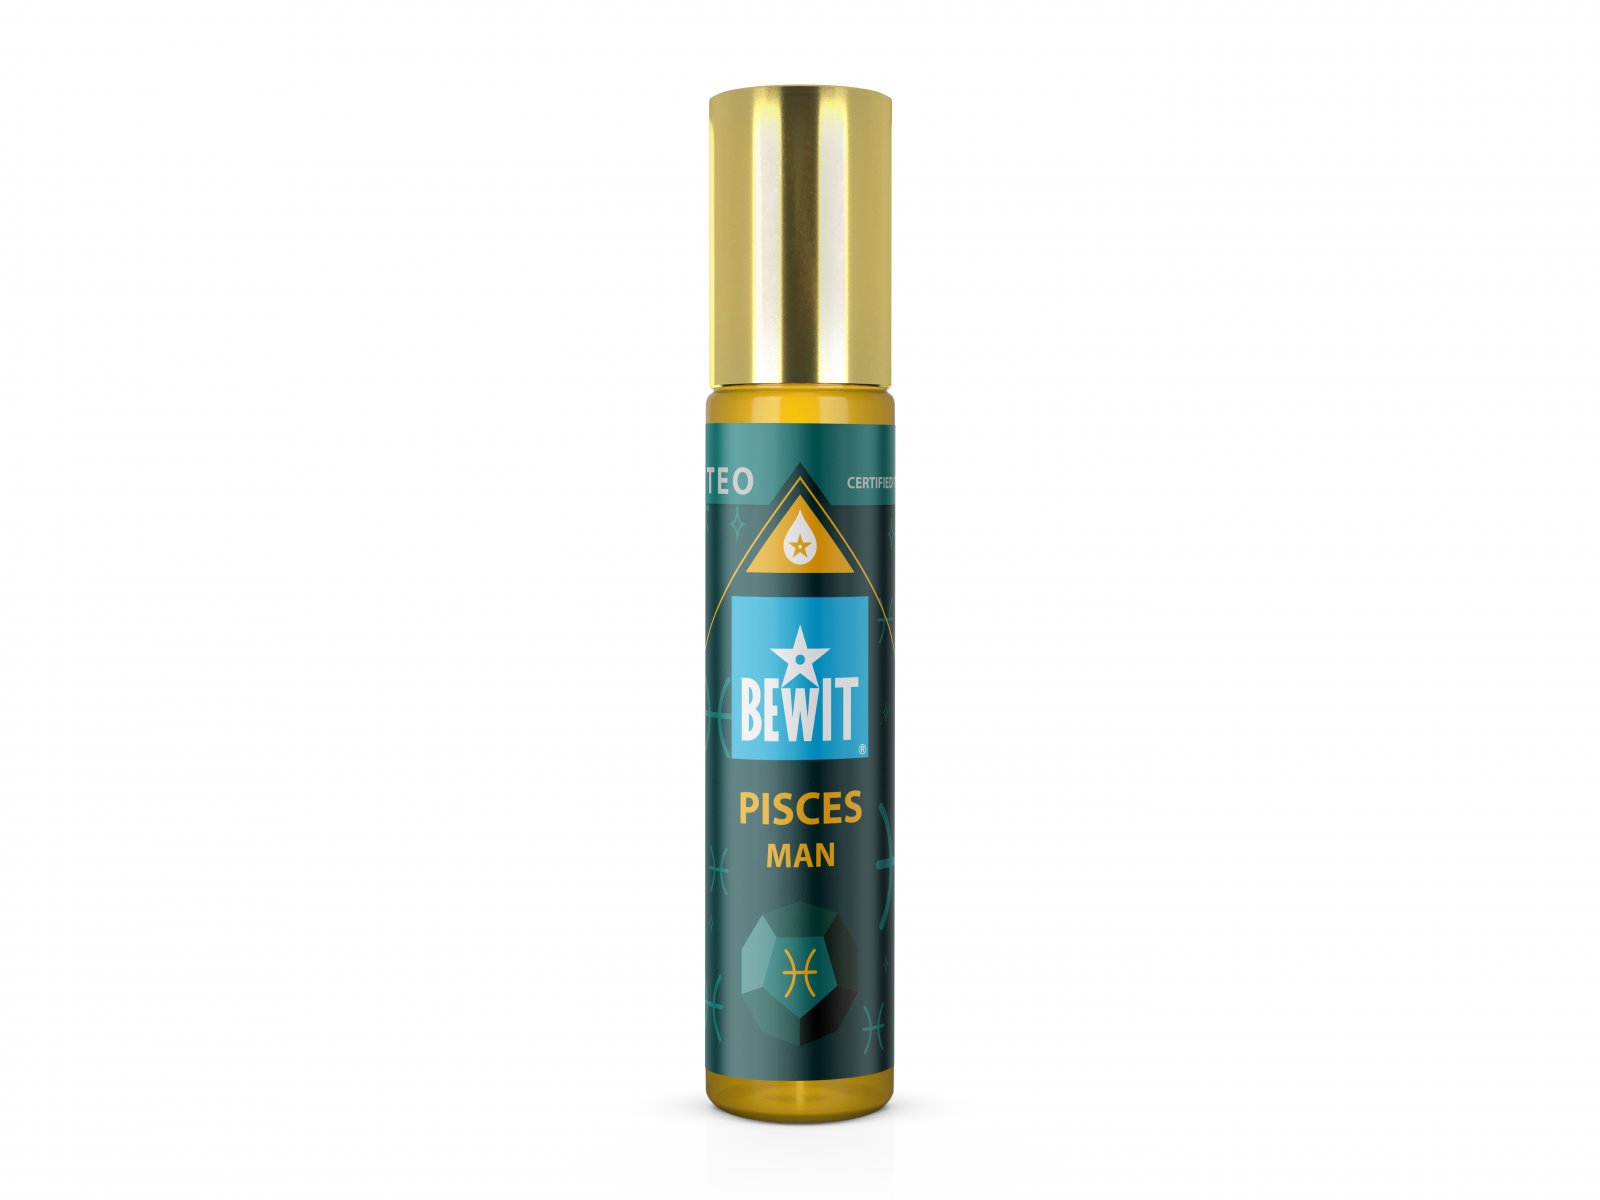 BEWIT® MAN PISCES (FISH) - Men's roll-on oil perfume